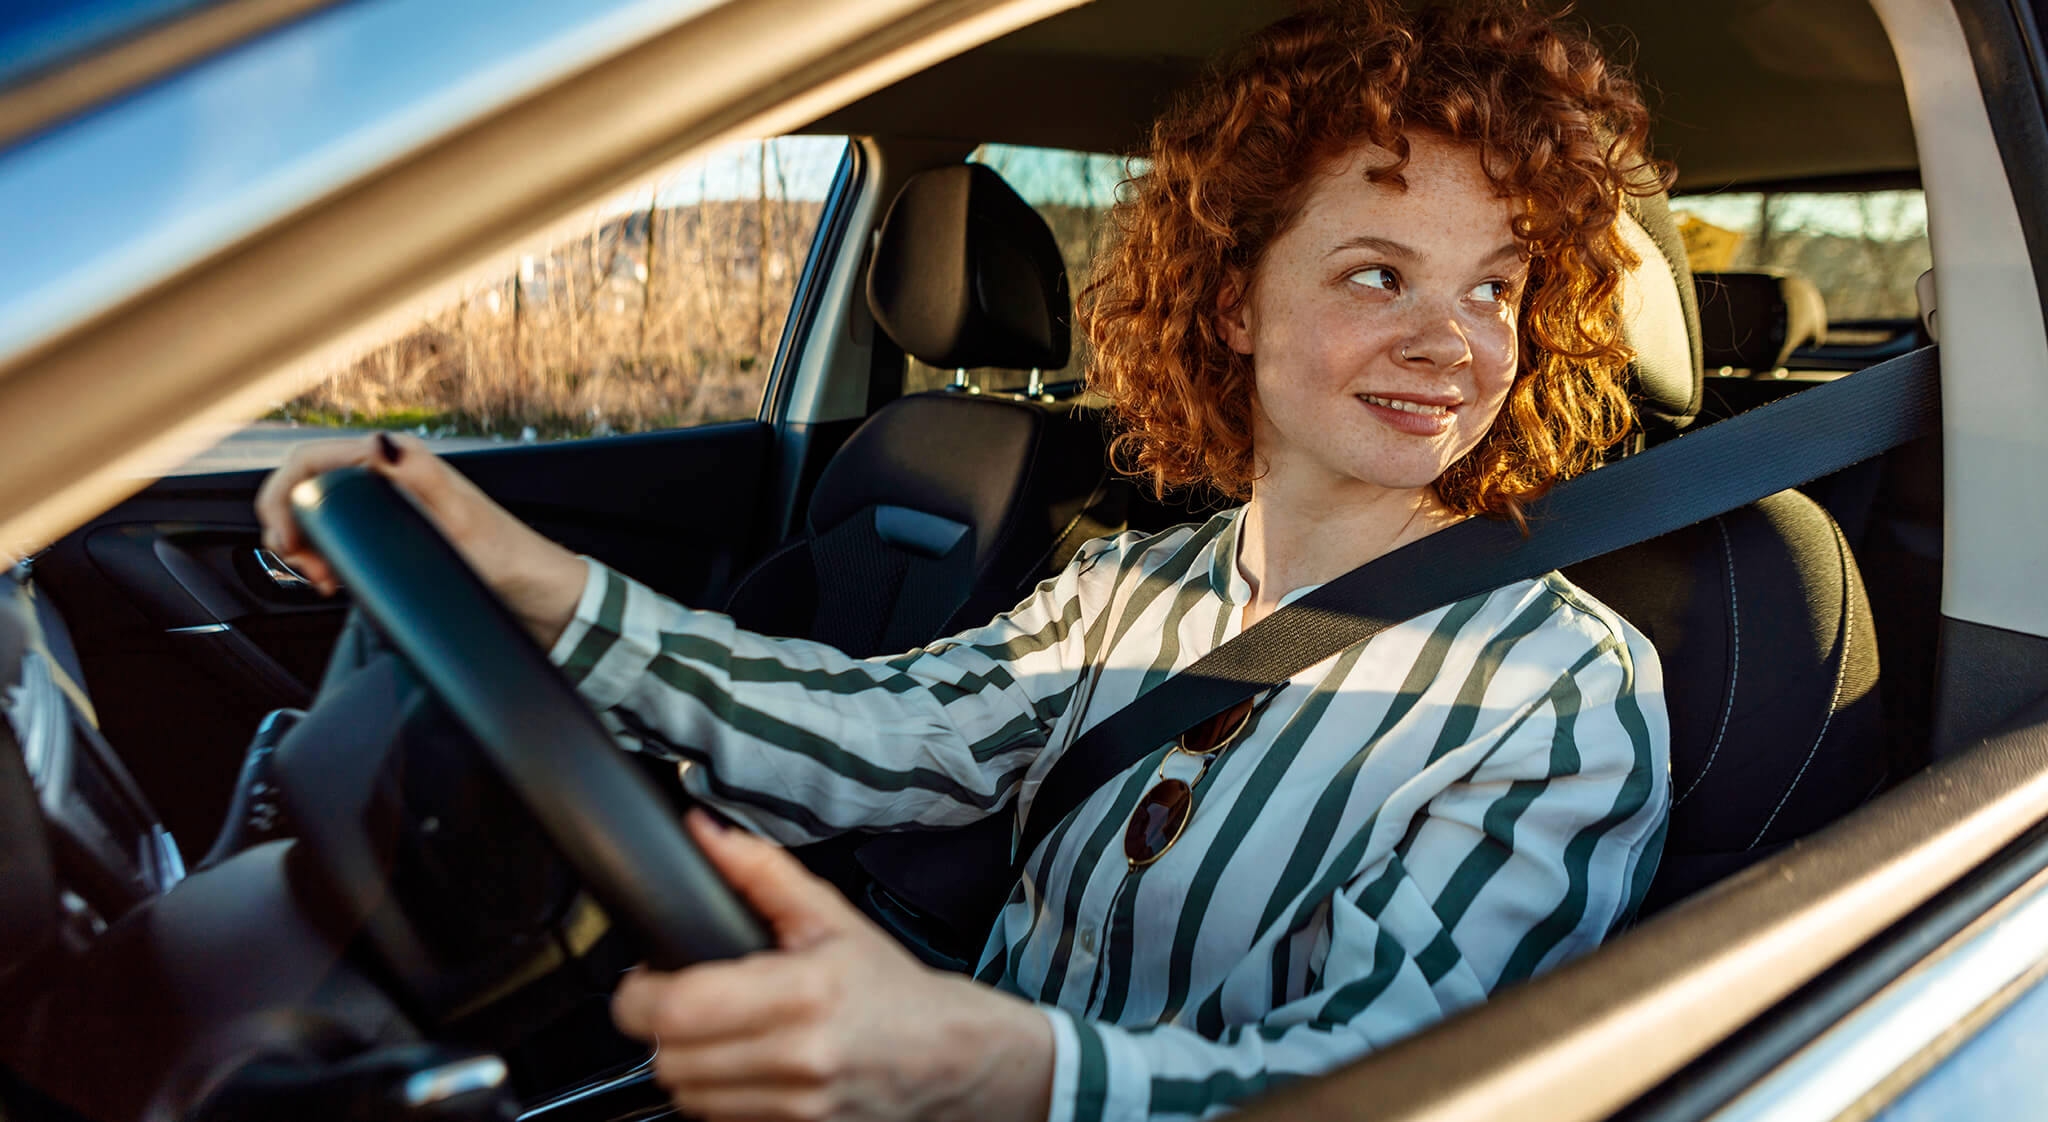 Change Vehicle Ownership With a DMV Car Title Transfer - Rocket Lawyer